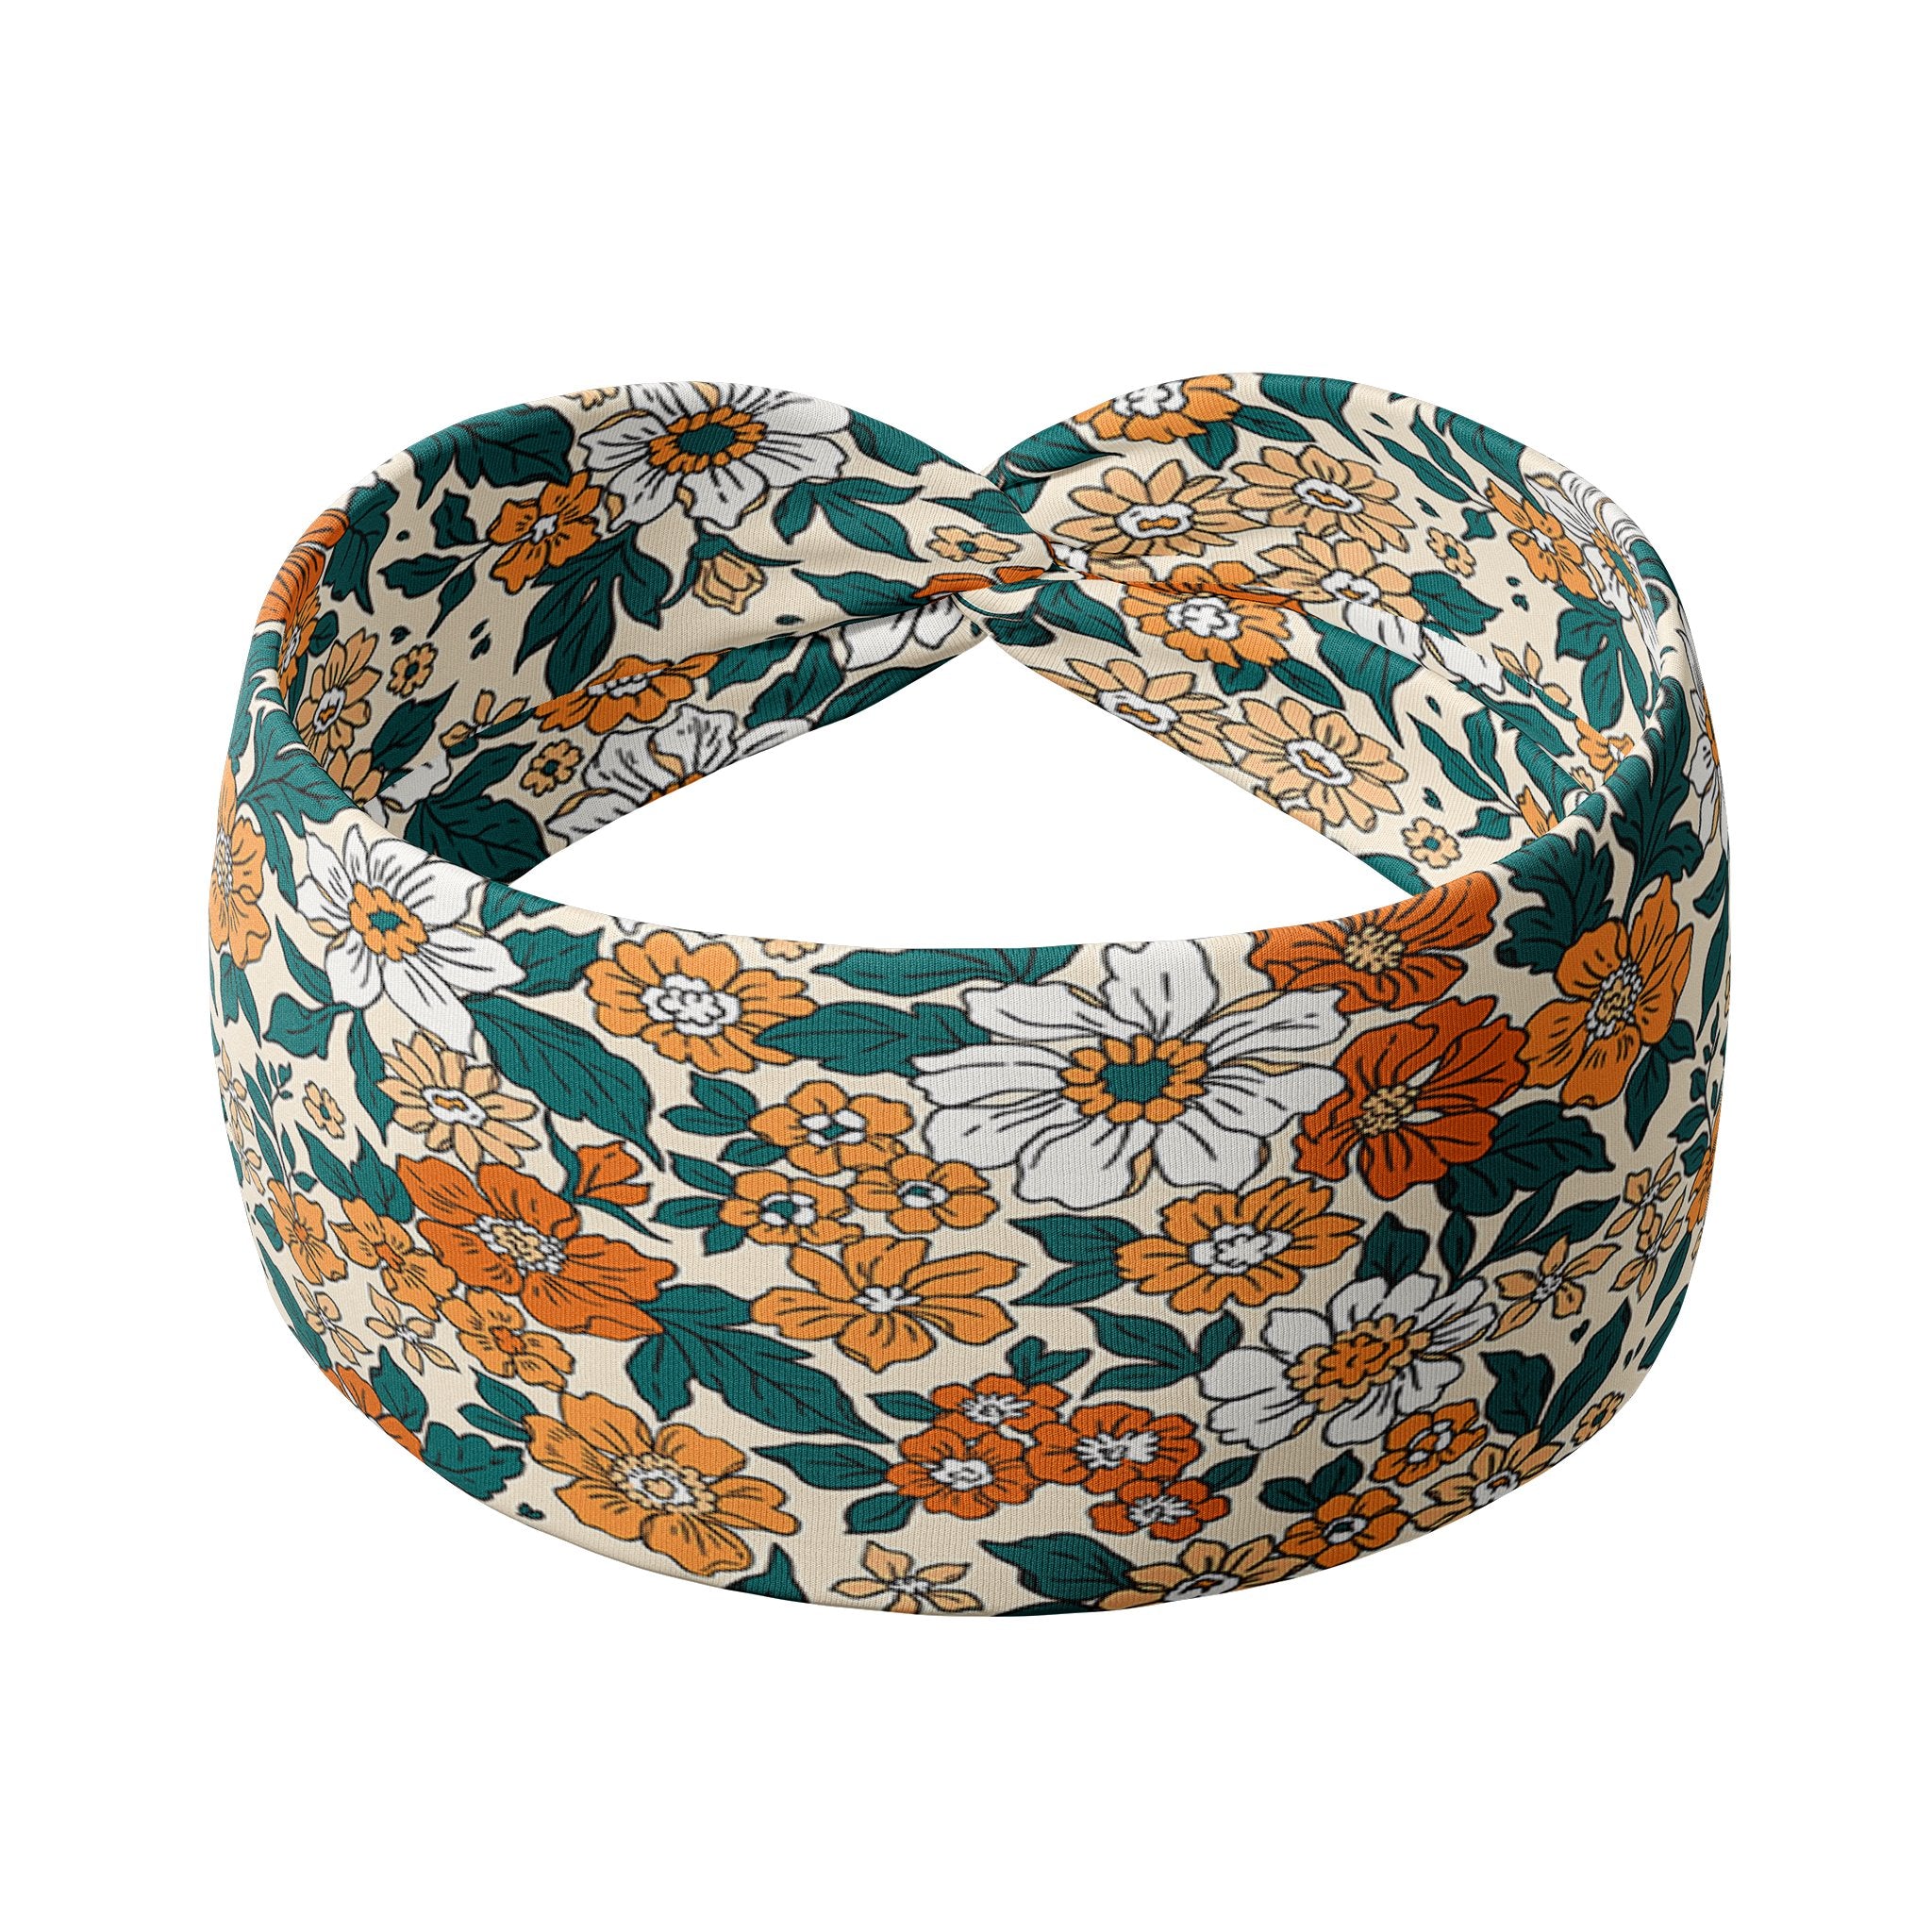 Adult women's beige headband with teal, orange and white floral print